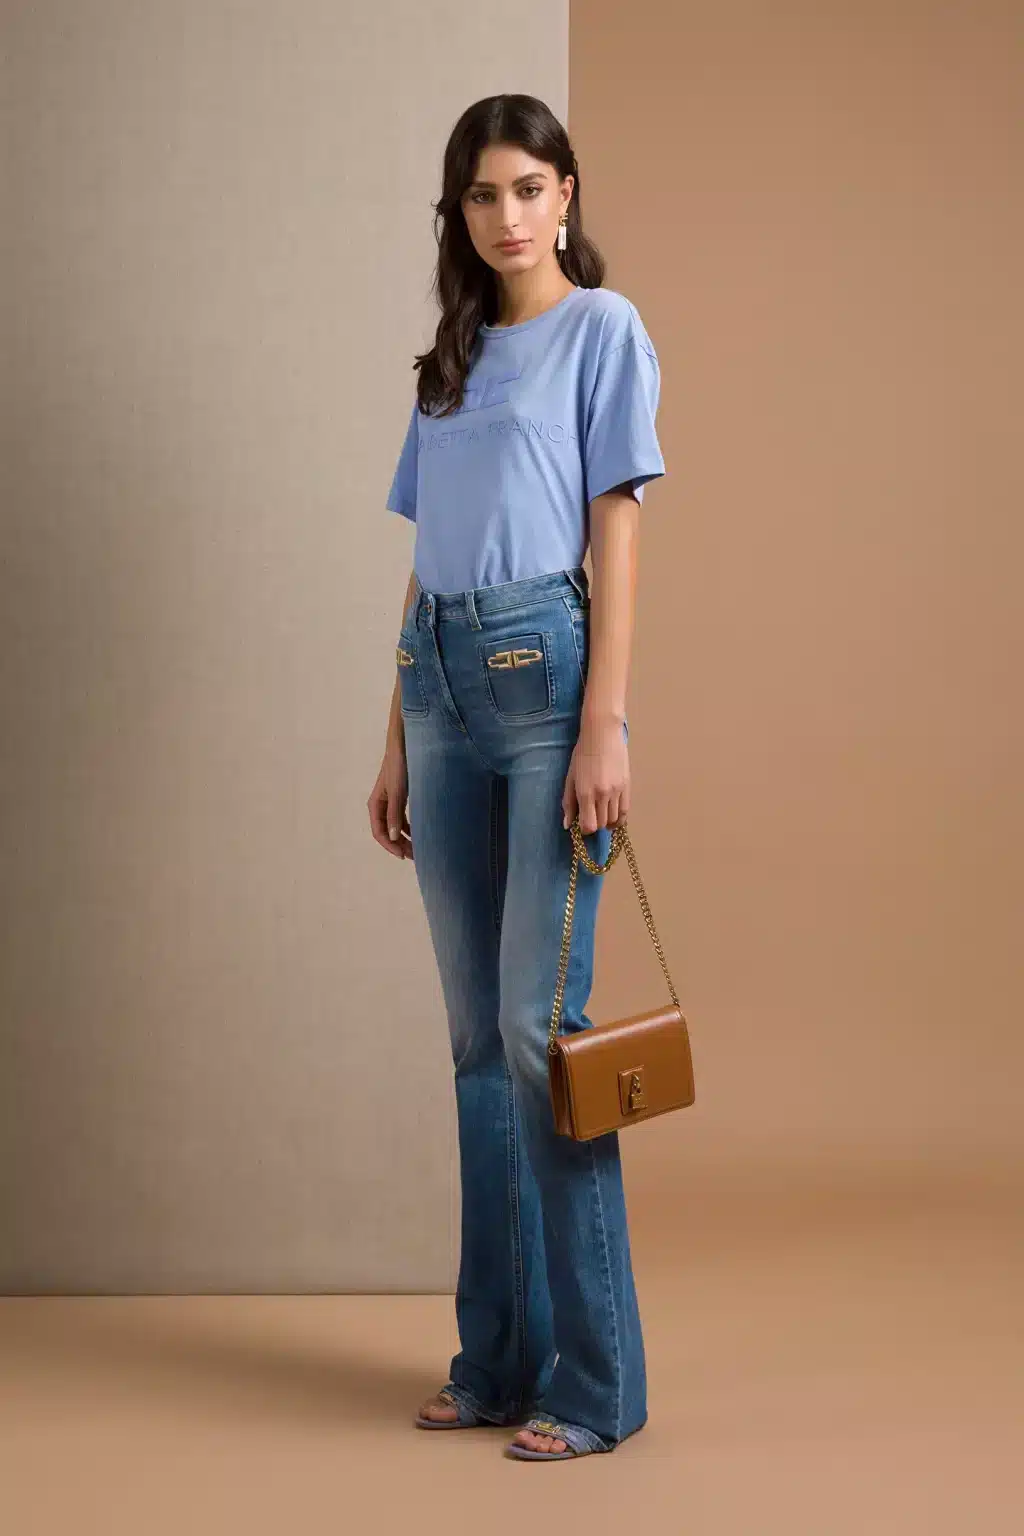 Spring summer 2022 ELISABETTA FRANCHI T-SHIRT WITH LOGO PRINT IN MATCHING COLOUR